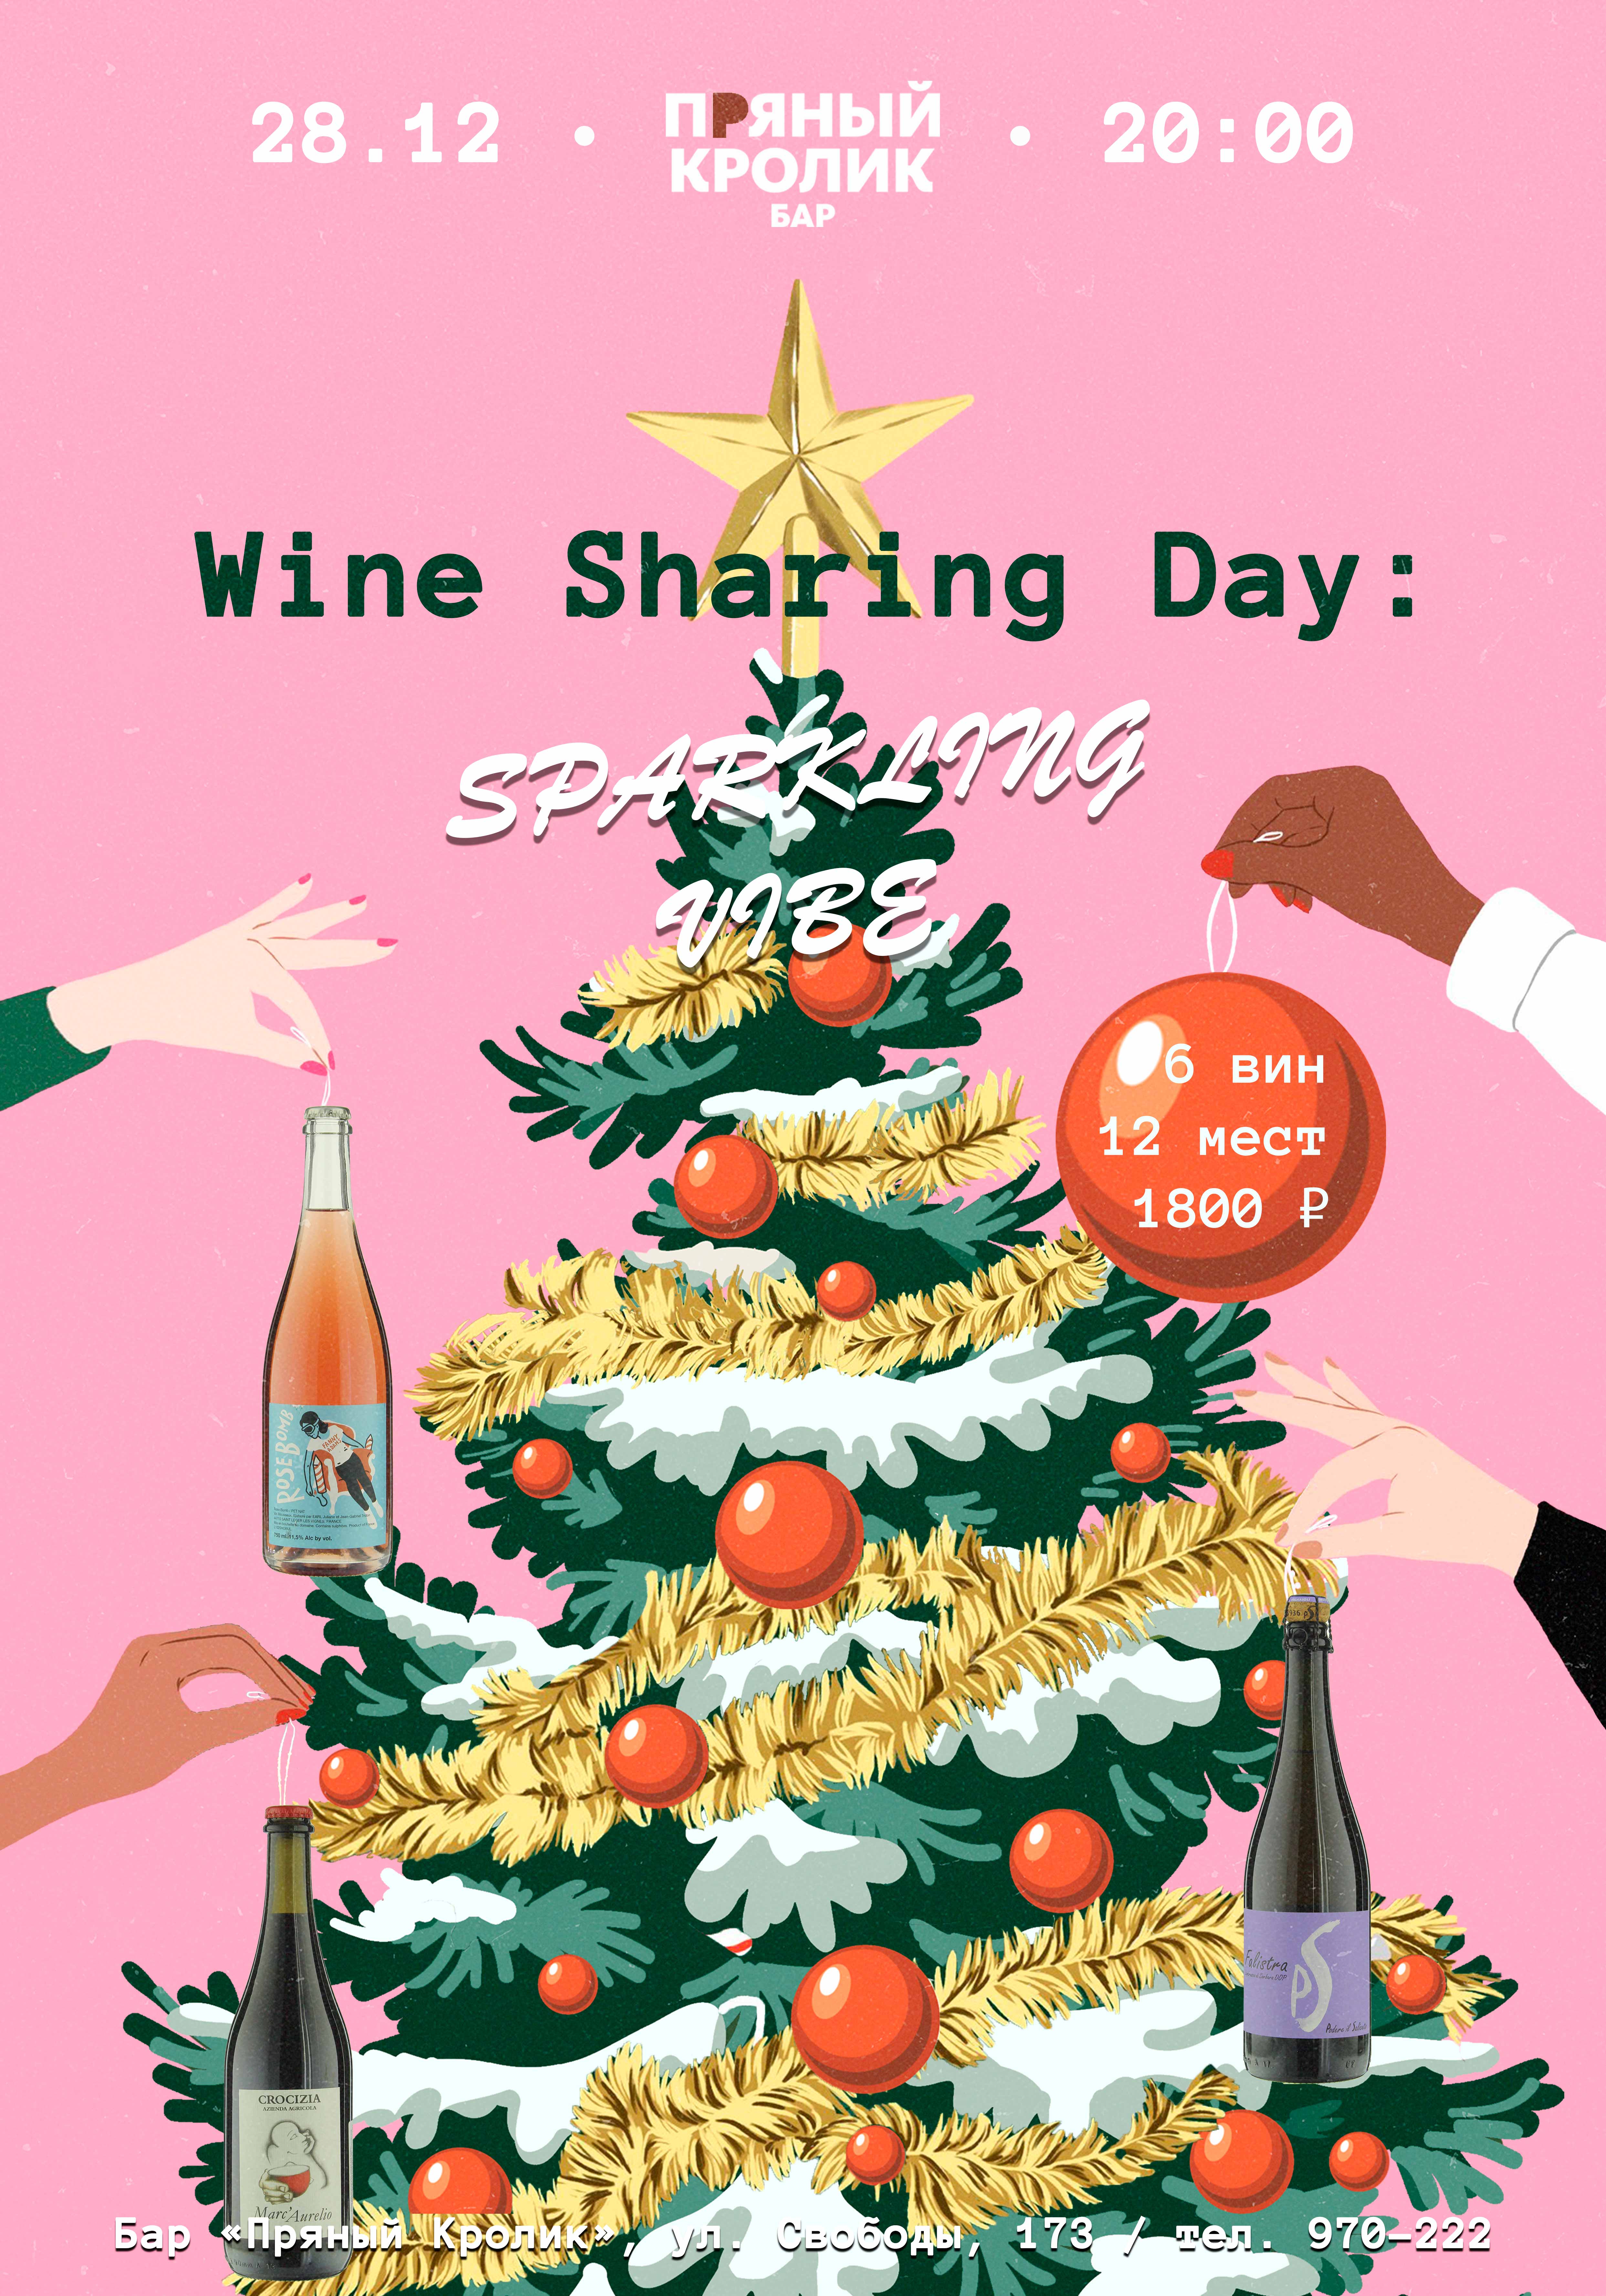 Wine Sharing Day: Sparkling vibe